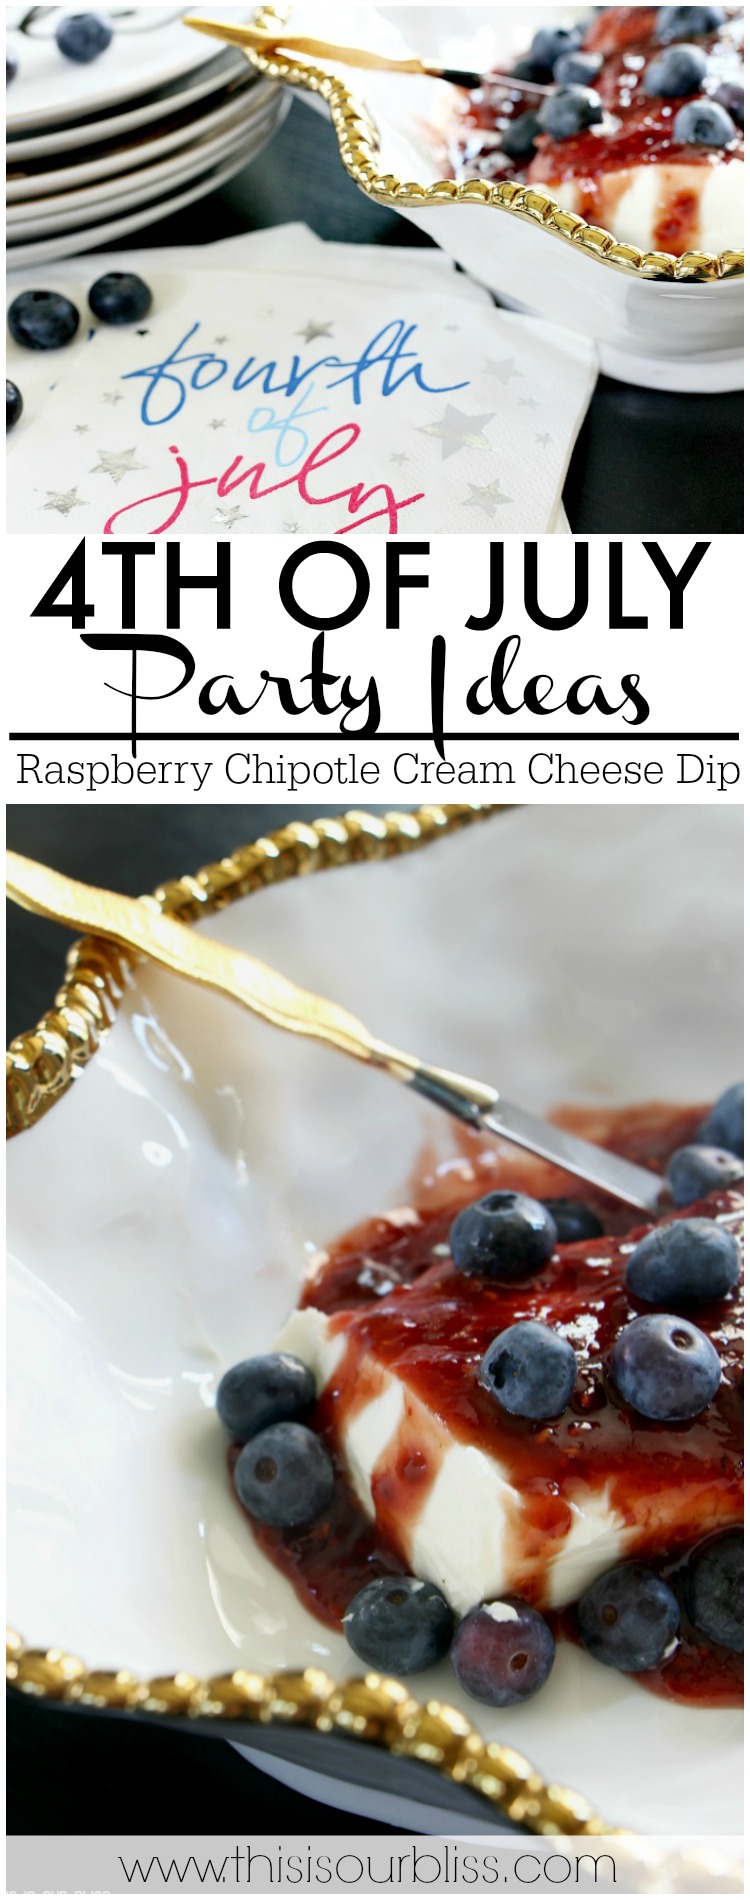 Festive & Frugal 4th of July Party Ideas | 30 second Raspberry Chipotle Cream Cheese Dip | This is our Bliss